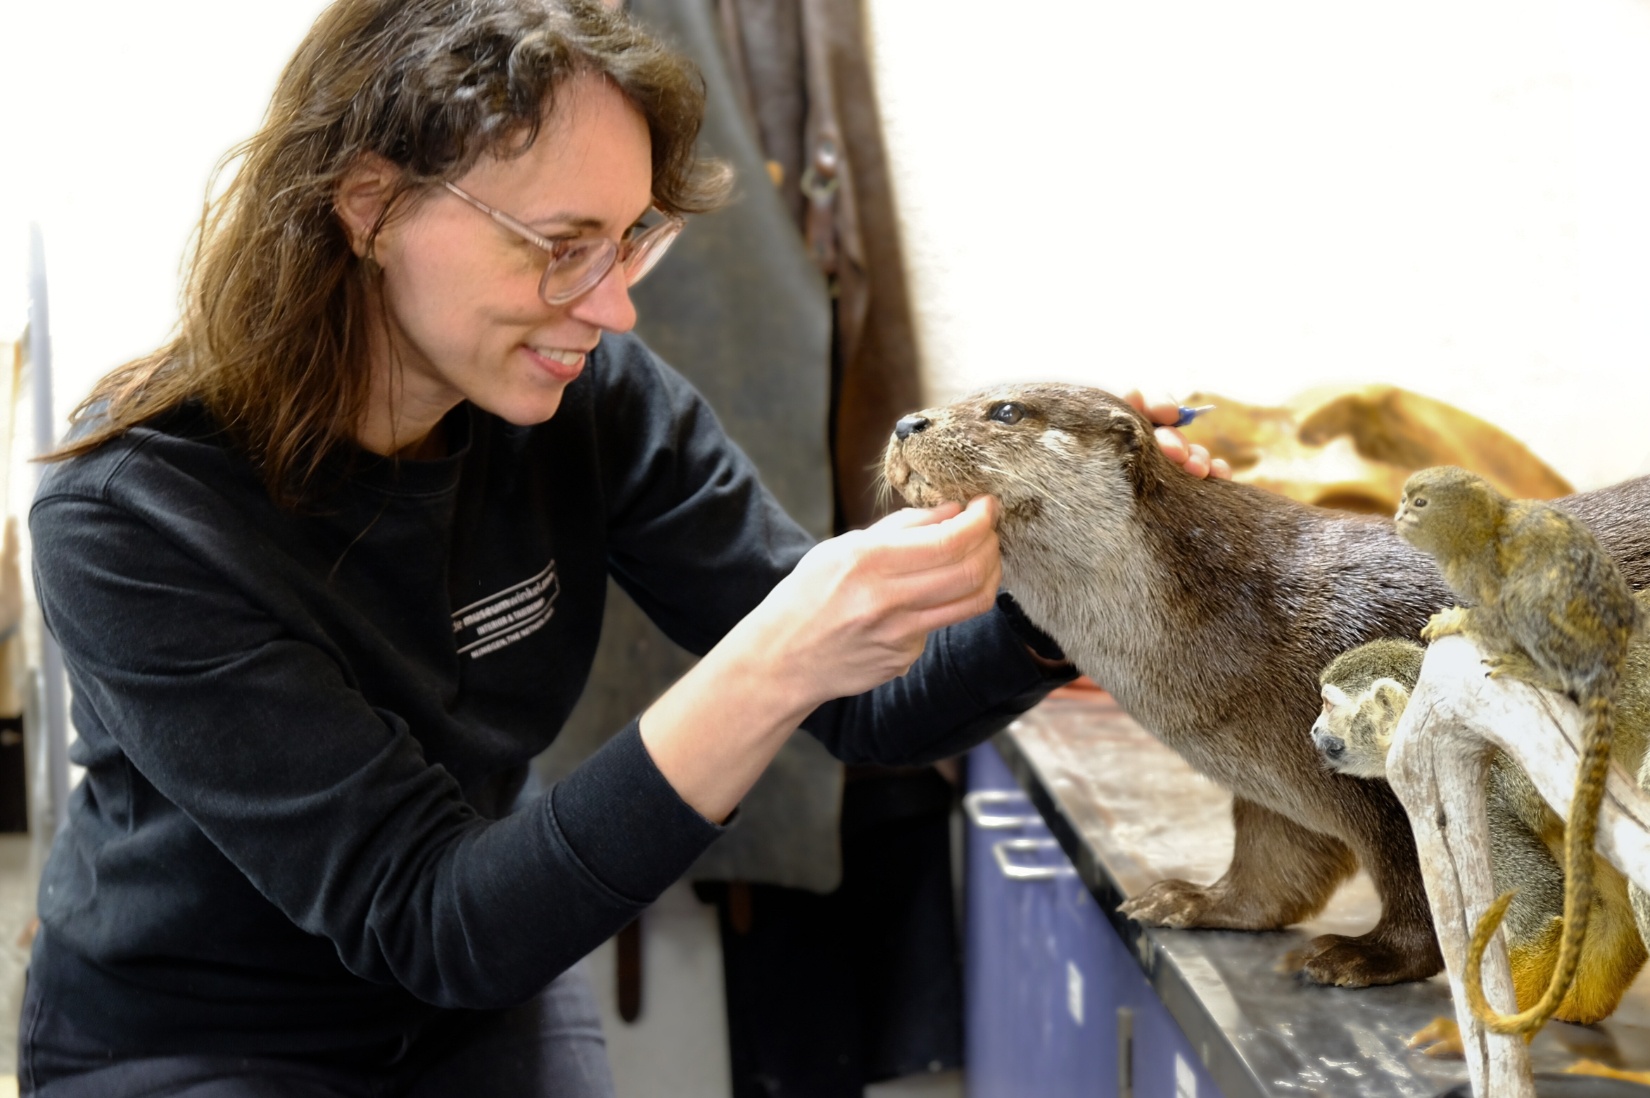 1 May - Demo day with our taxidermist, Daphne.